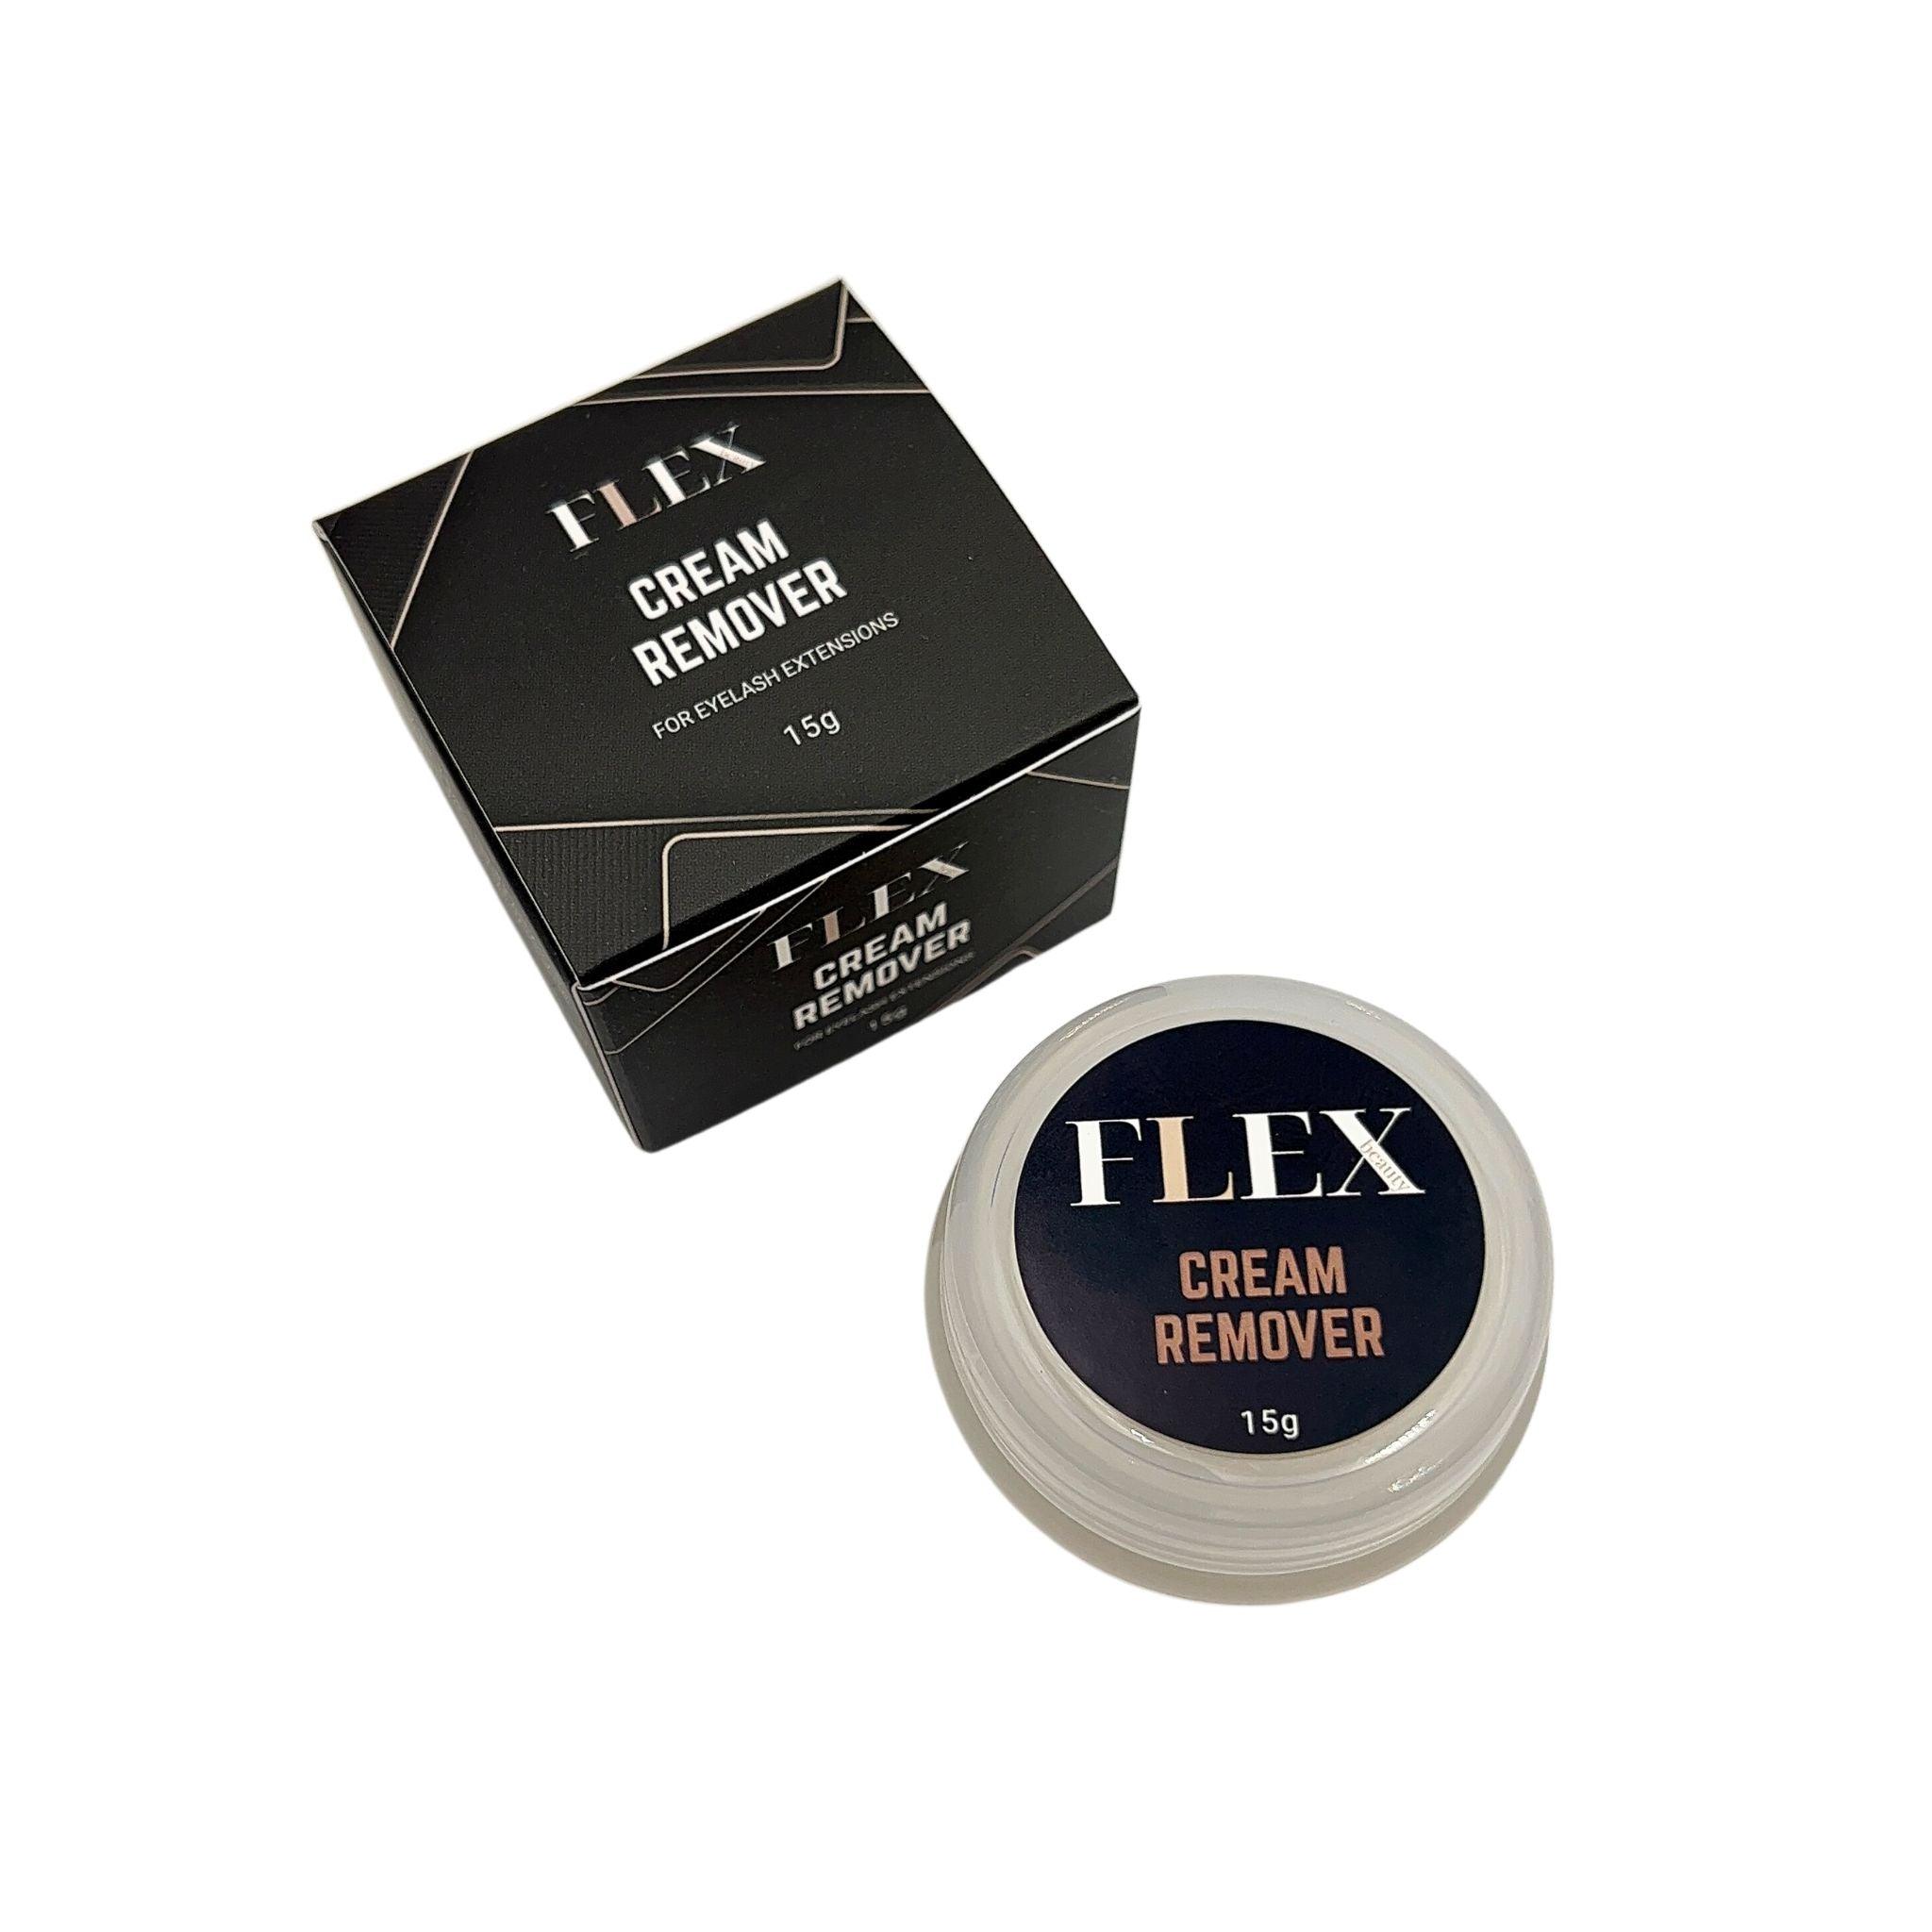 FLEX Beauty Cream Remover for Eyelash Extensions - The Beauty House Shop